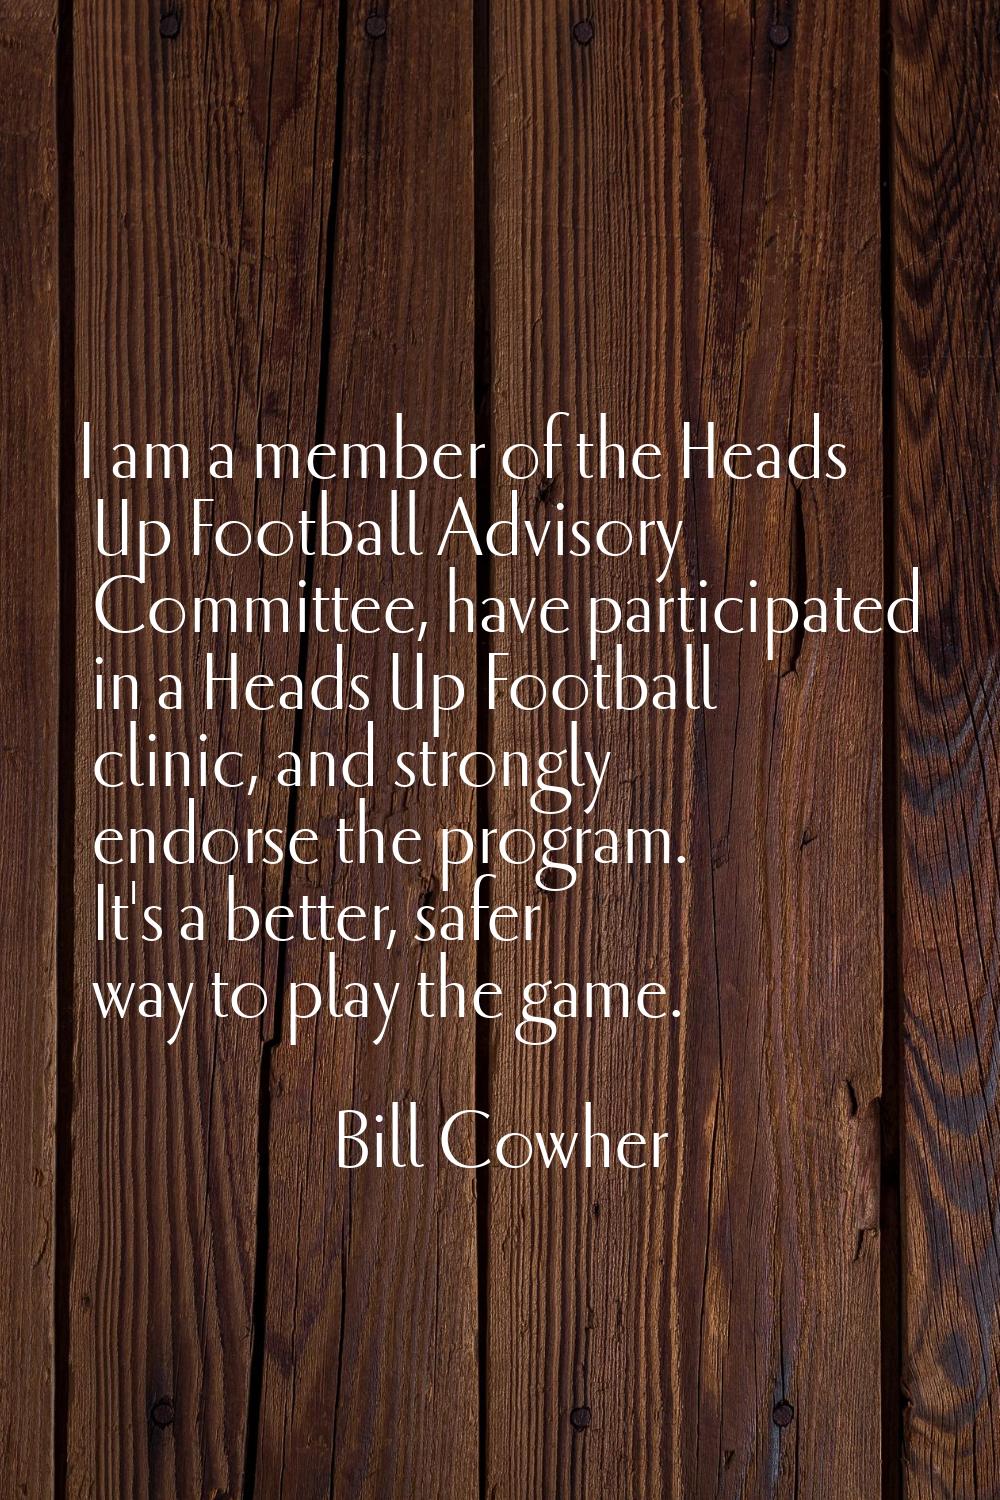 I am a member of the Heads Up Football Advisory Committee, have participated in a Heads Up Football